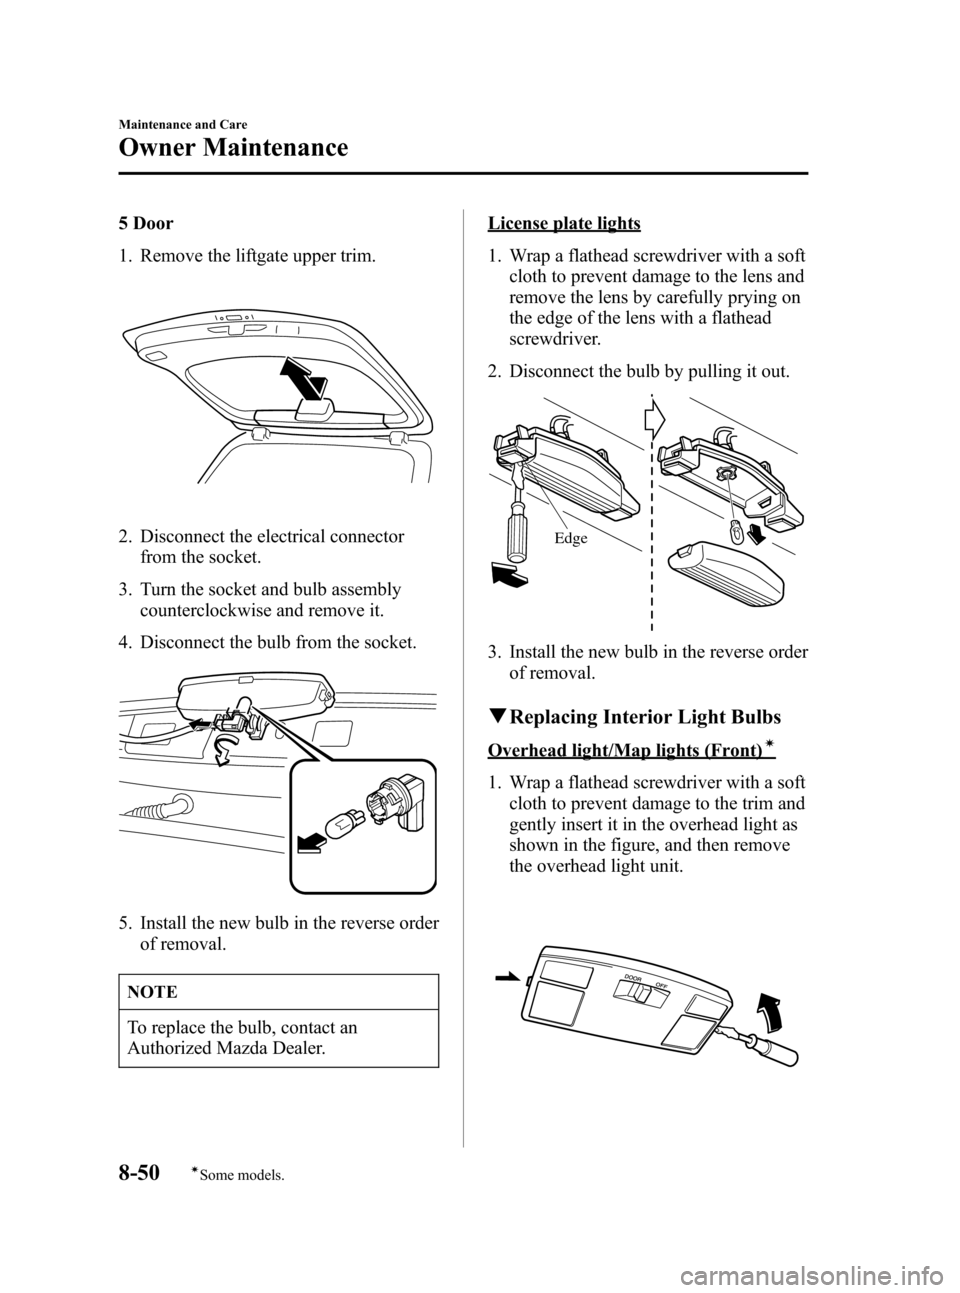 MAZDA MODEL 3 HATCHBACK 2006  Owners Manual (in English) Black plate (298,1)
5 Door
1. Remove the liftgate upper trim.
2. Disconnect the electrical connector
from the socket.
3. Turn the socket and bulb assembly
counterclockwise and remove it.
4. Disconnect